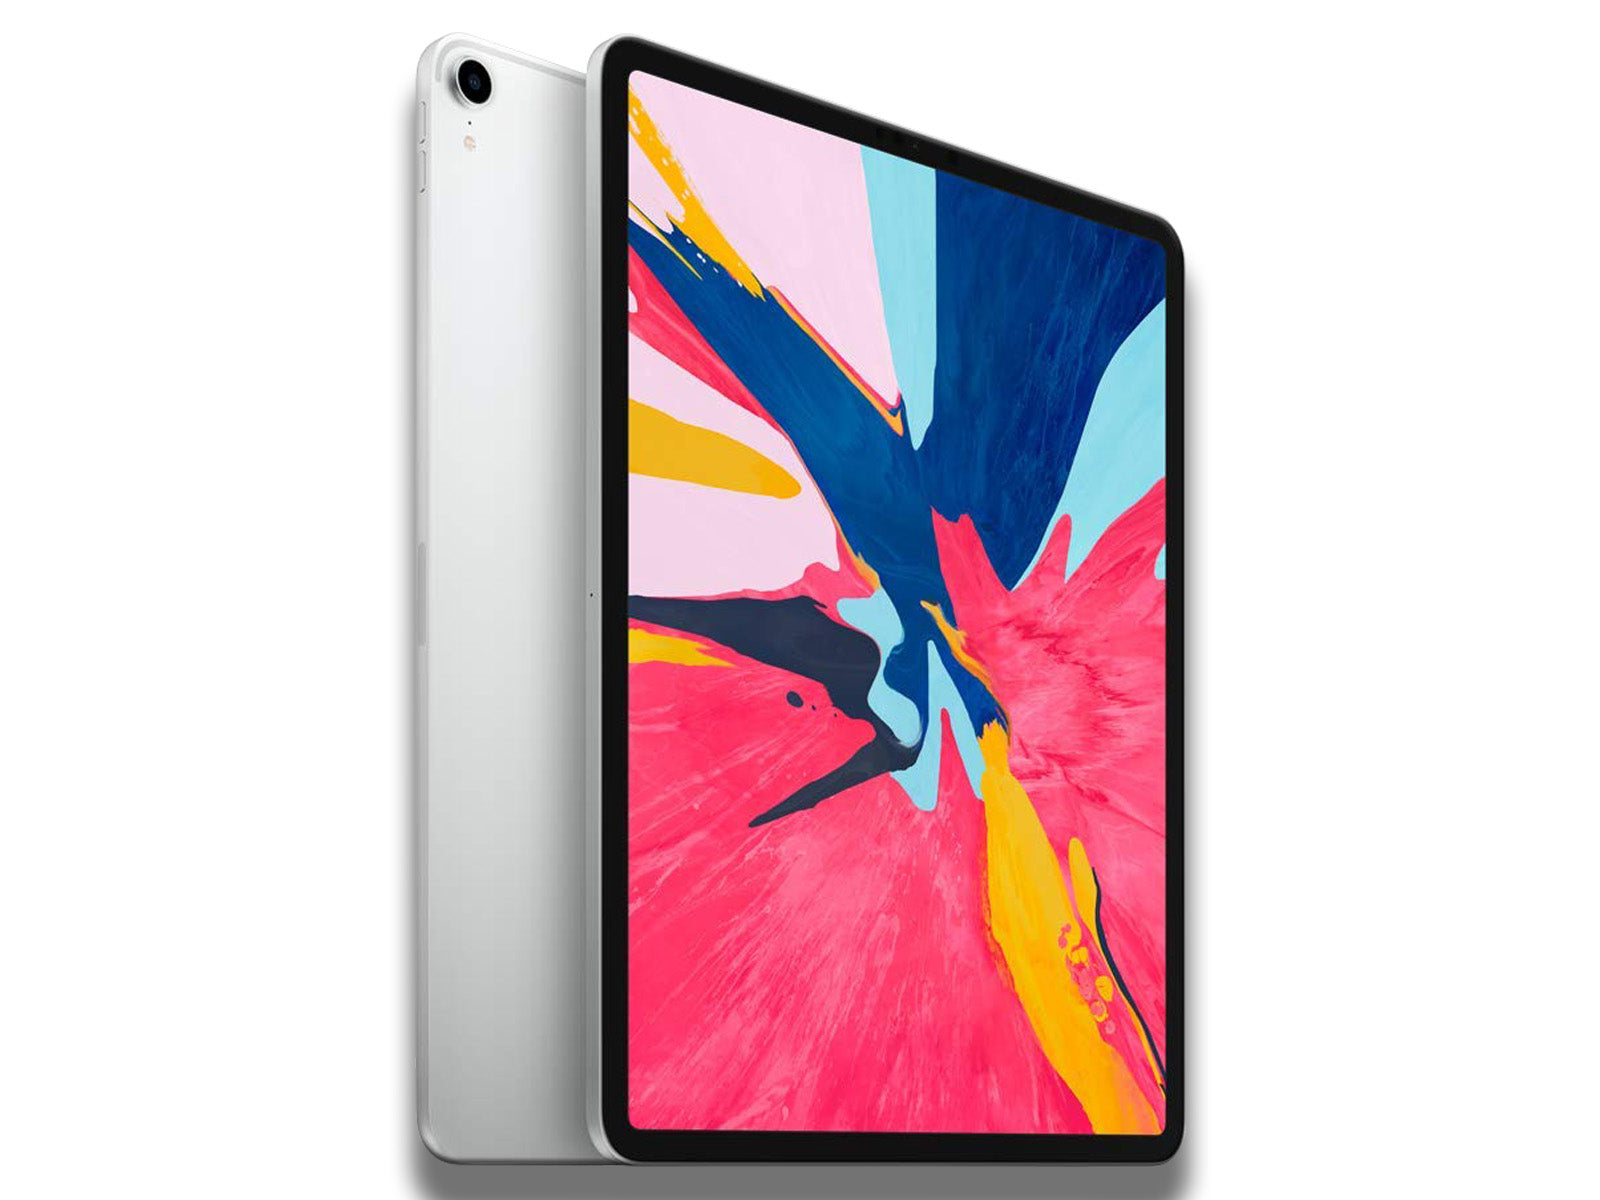 Apple iPad Pro 3rd Generation 12.9-inch angled view of the Silver